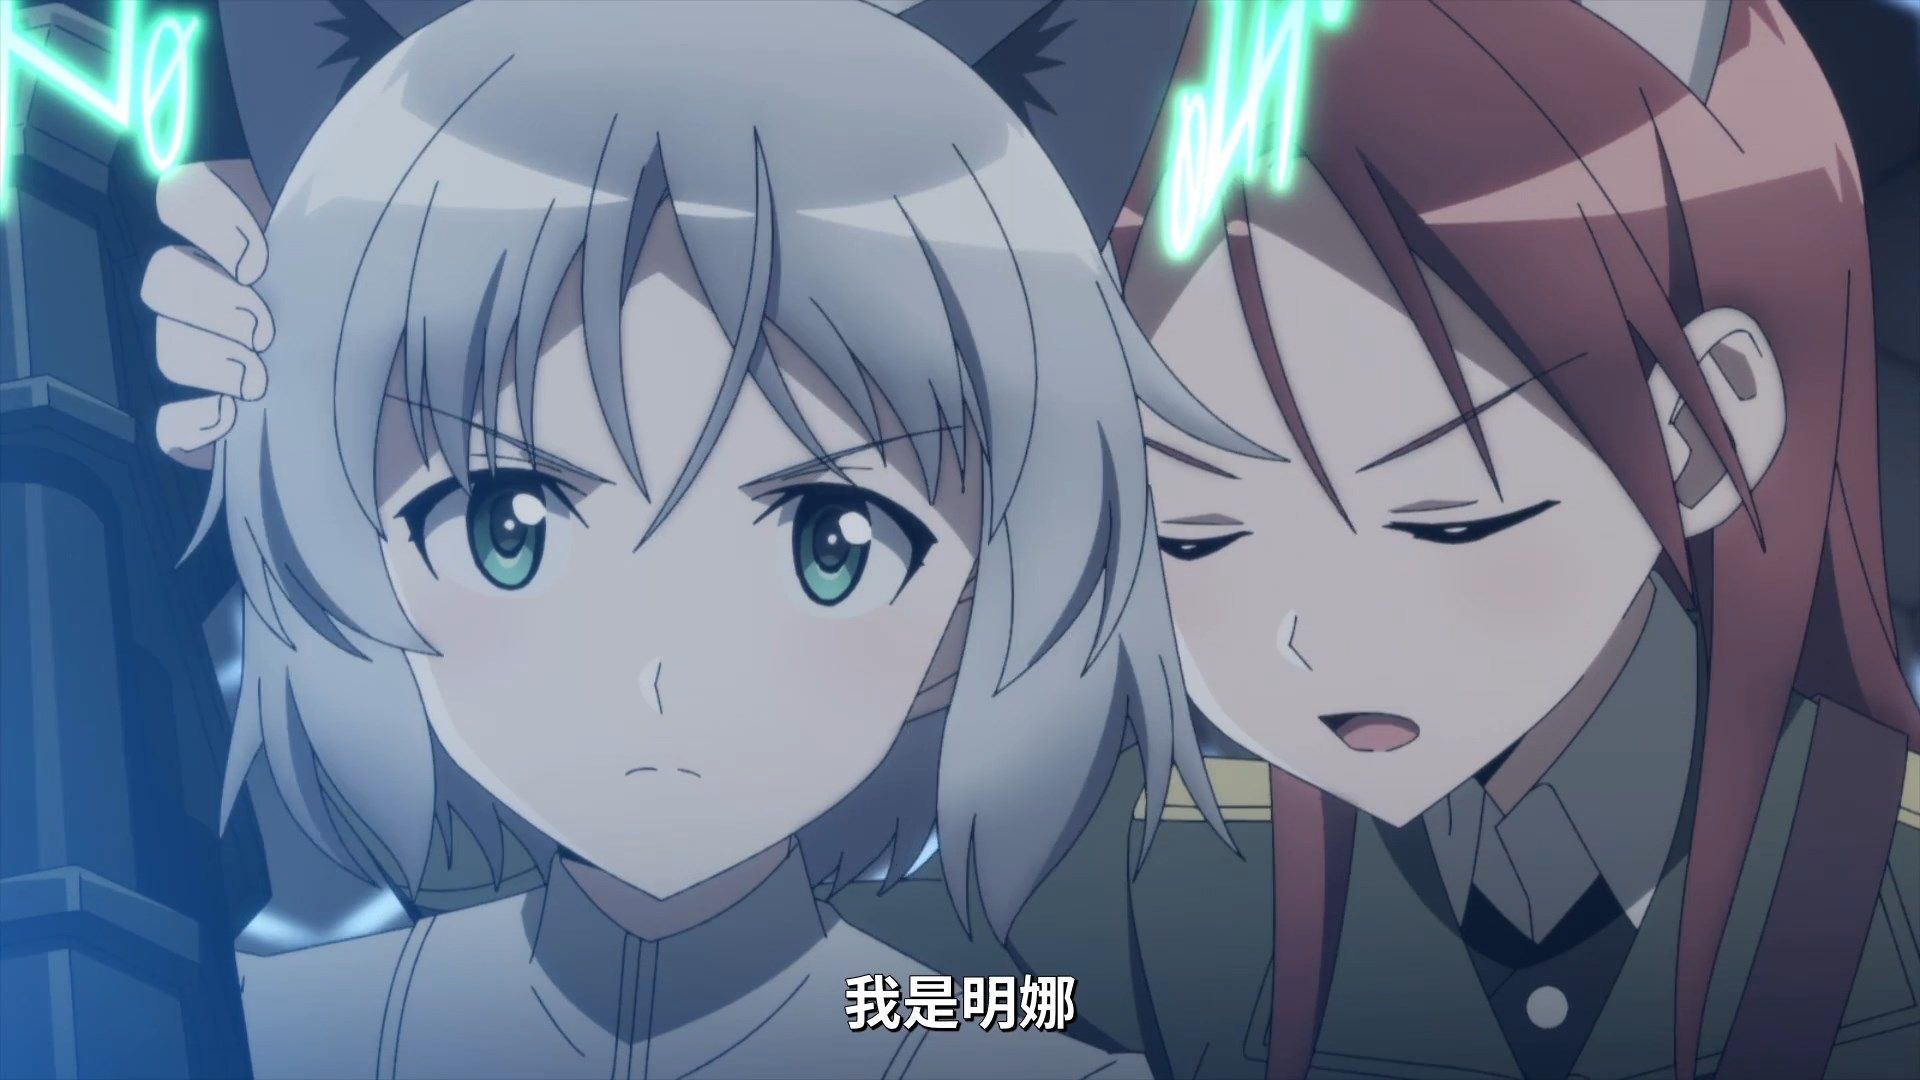 _Lilith_Raws_Strike_Witches_Road_to_Berlin_12_Baha_WEB_DL_1080p_AVC_AAC_CHT_MKV_.mkv_snapshot_09.19